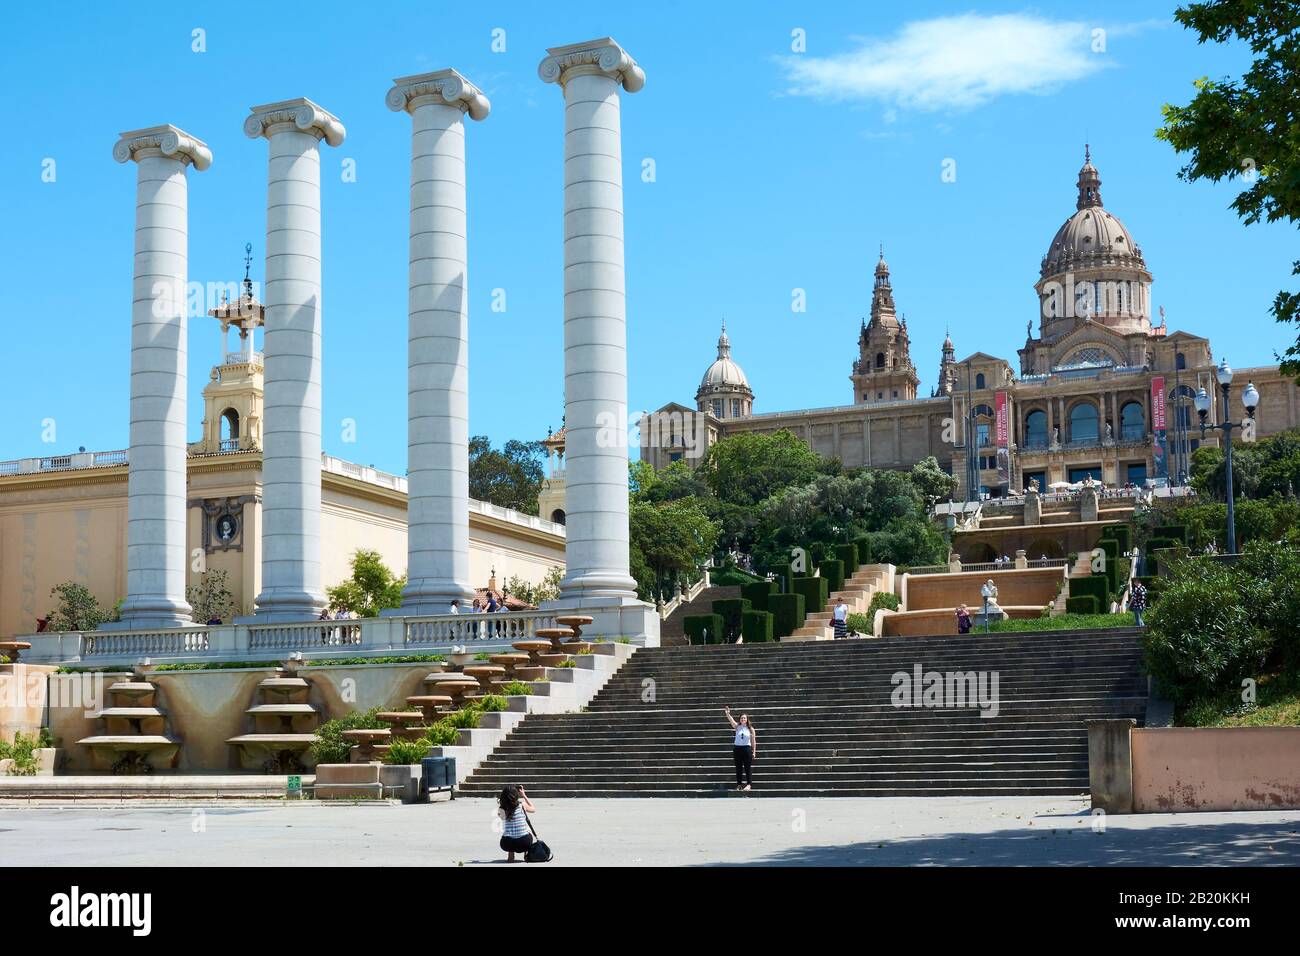 BARCELONA, SPAIN - MAY 13, 2017: View of the famous Four Columns and the Palau Nacional building, which houses the National Museum, in Barcelona. Stock Photo